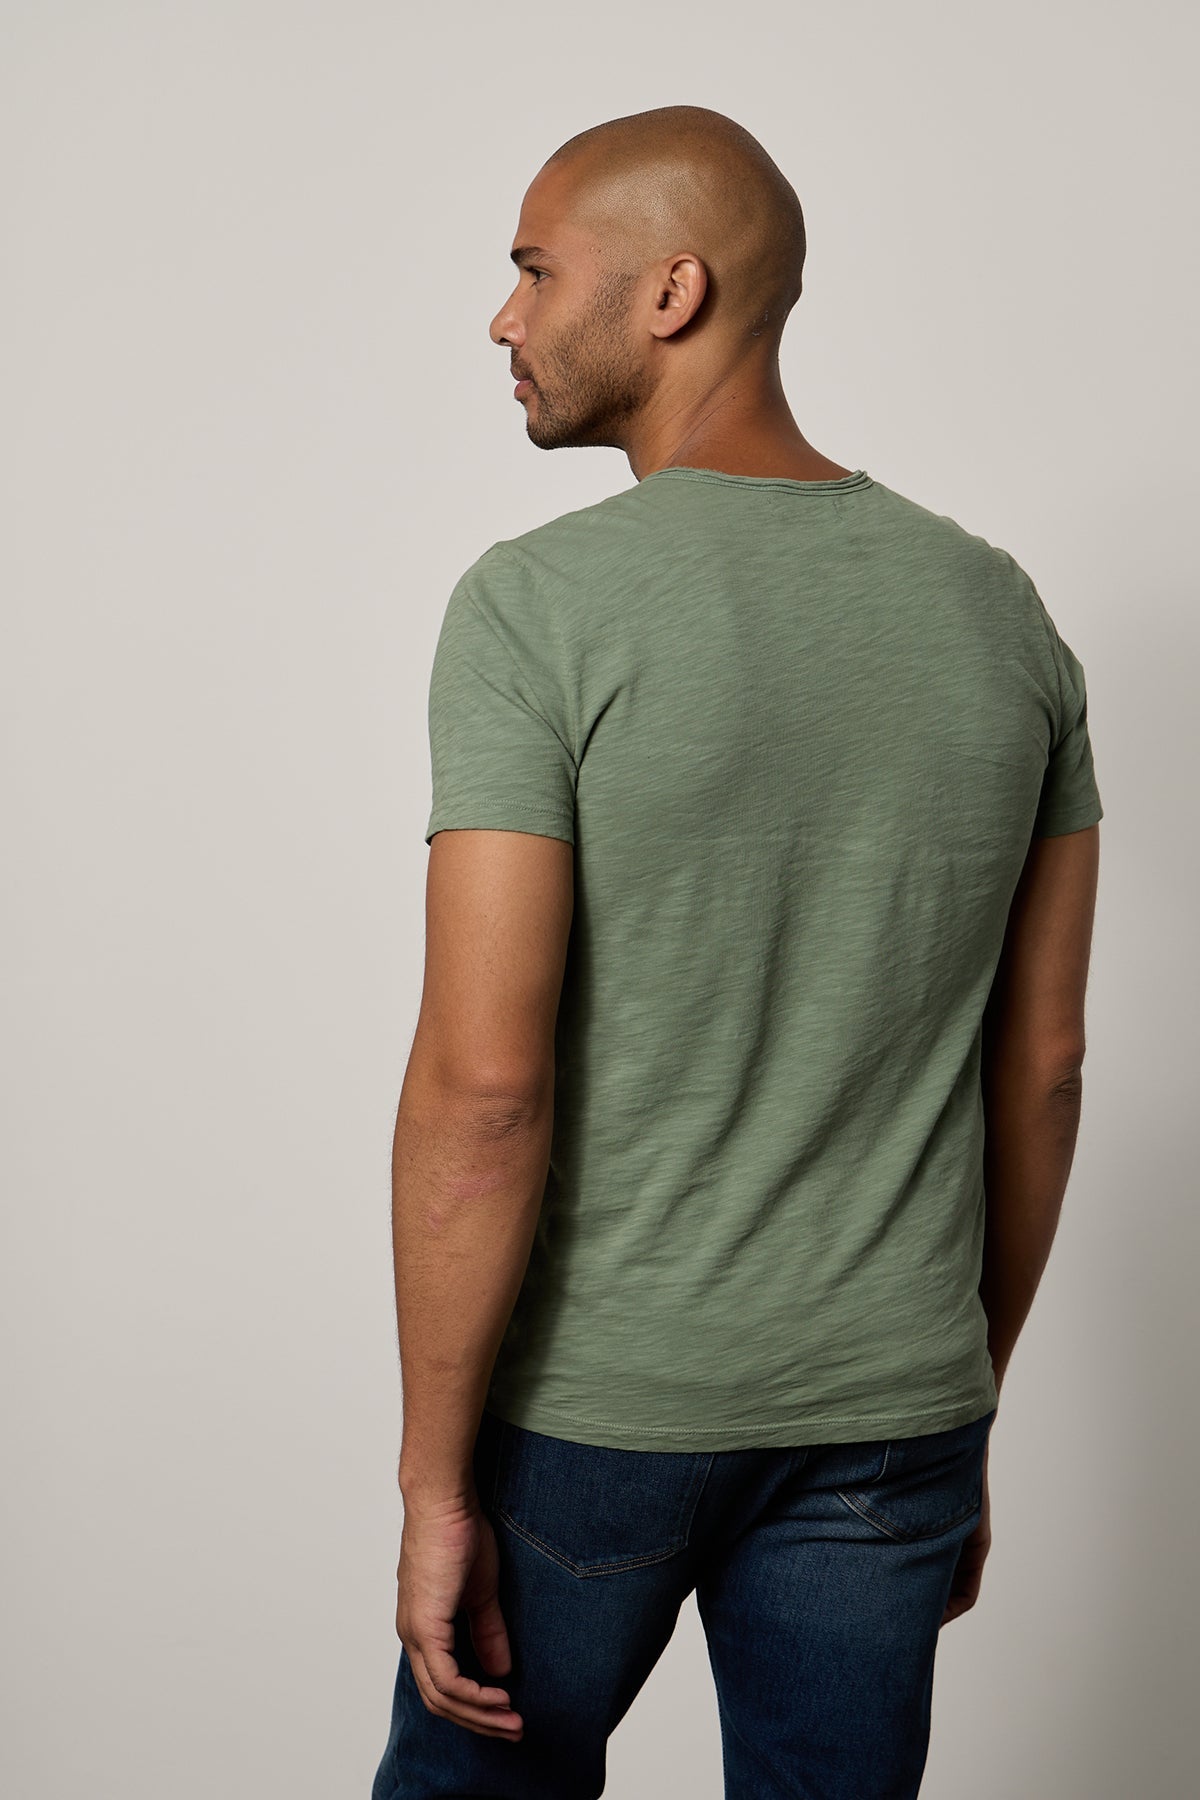   the back of a man wearing jeans and a green CHAD RAW EDGE COTTON SLUB POCKET TEE by Velvet by Graham & Spencer. 